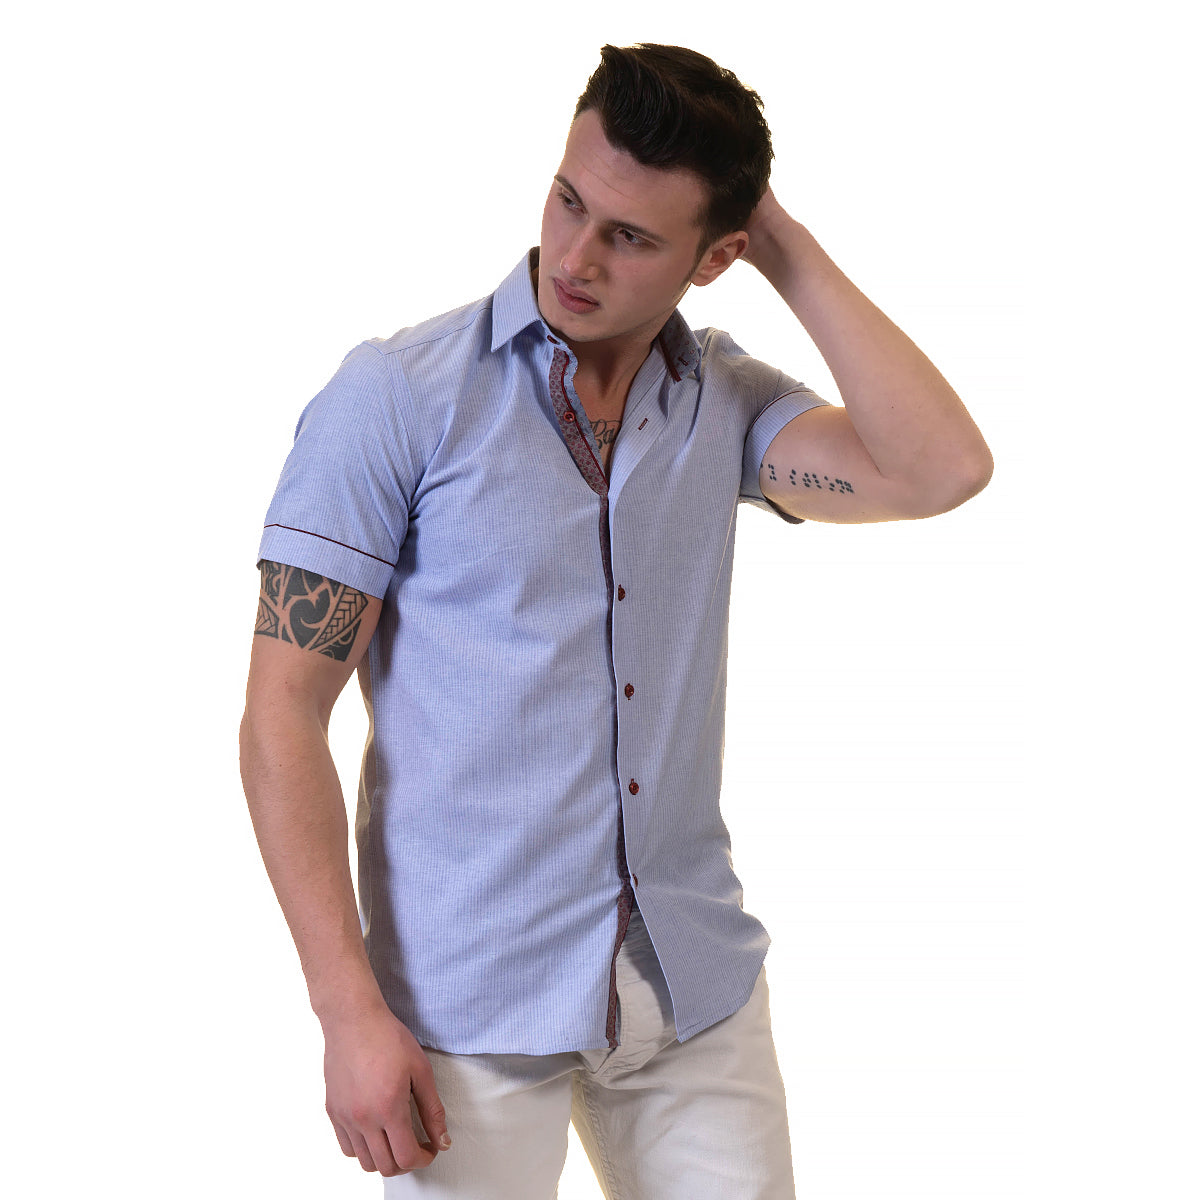 Mens Sky Blue Short Sleeve Button up Shirts - Tailored Slim Fit Cotton Dress Shirts